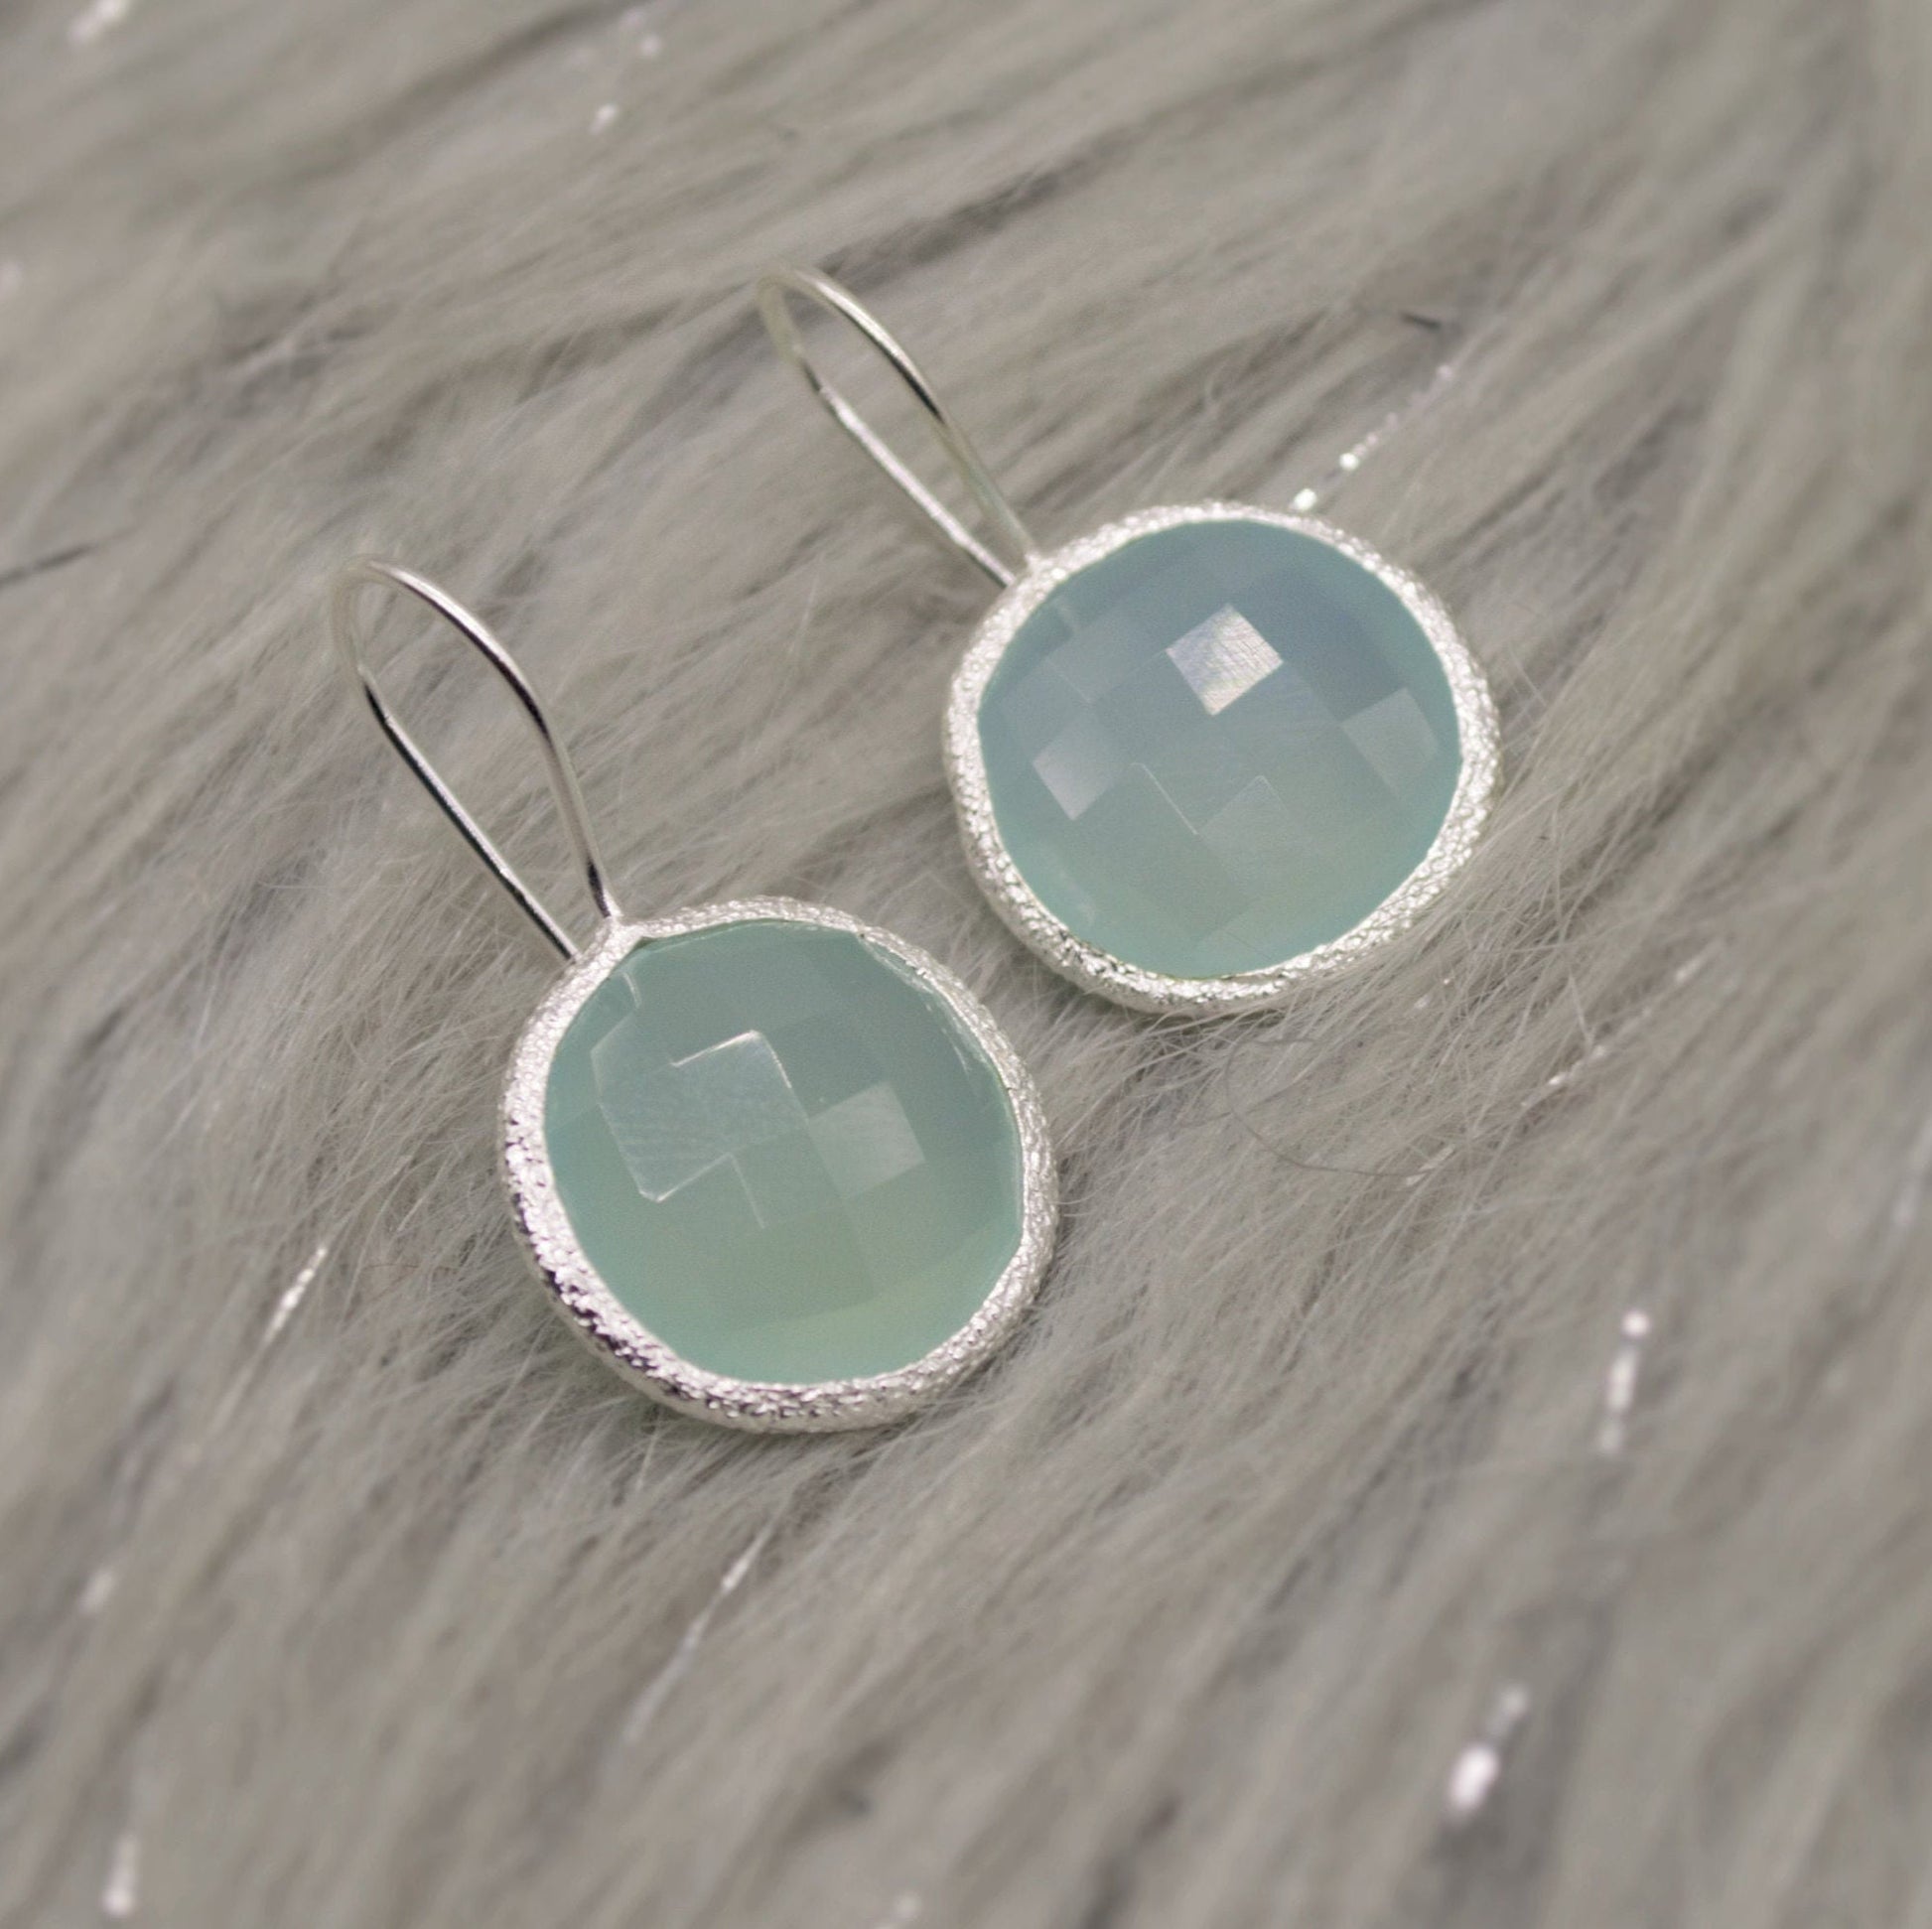 Aqua Chalcedony Earrings, Blue Dangle Earrings, Chalcedony Jewelry, Unique Sterling Silver Earrings, Birthday Gift For Her, Bridesmaid Gift